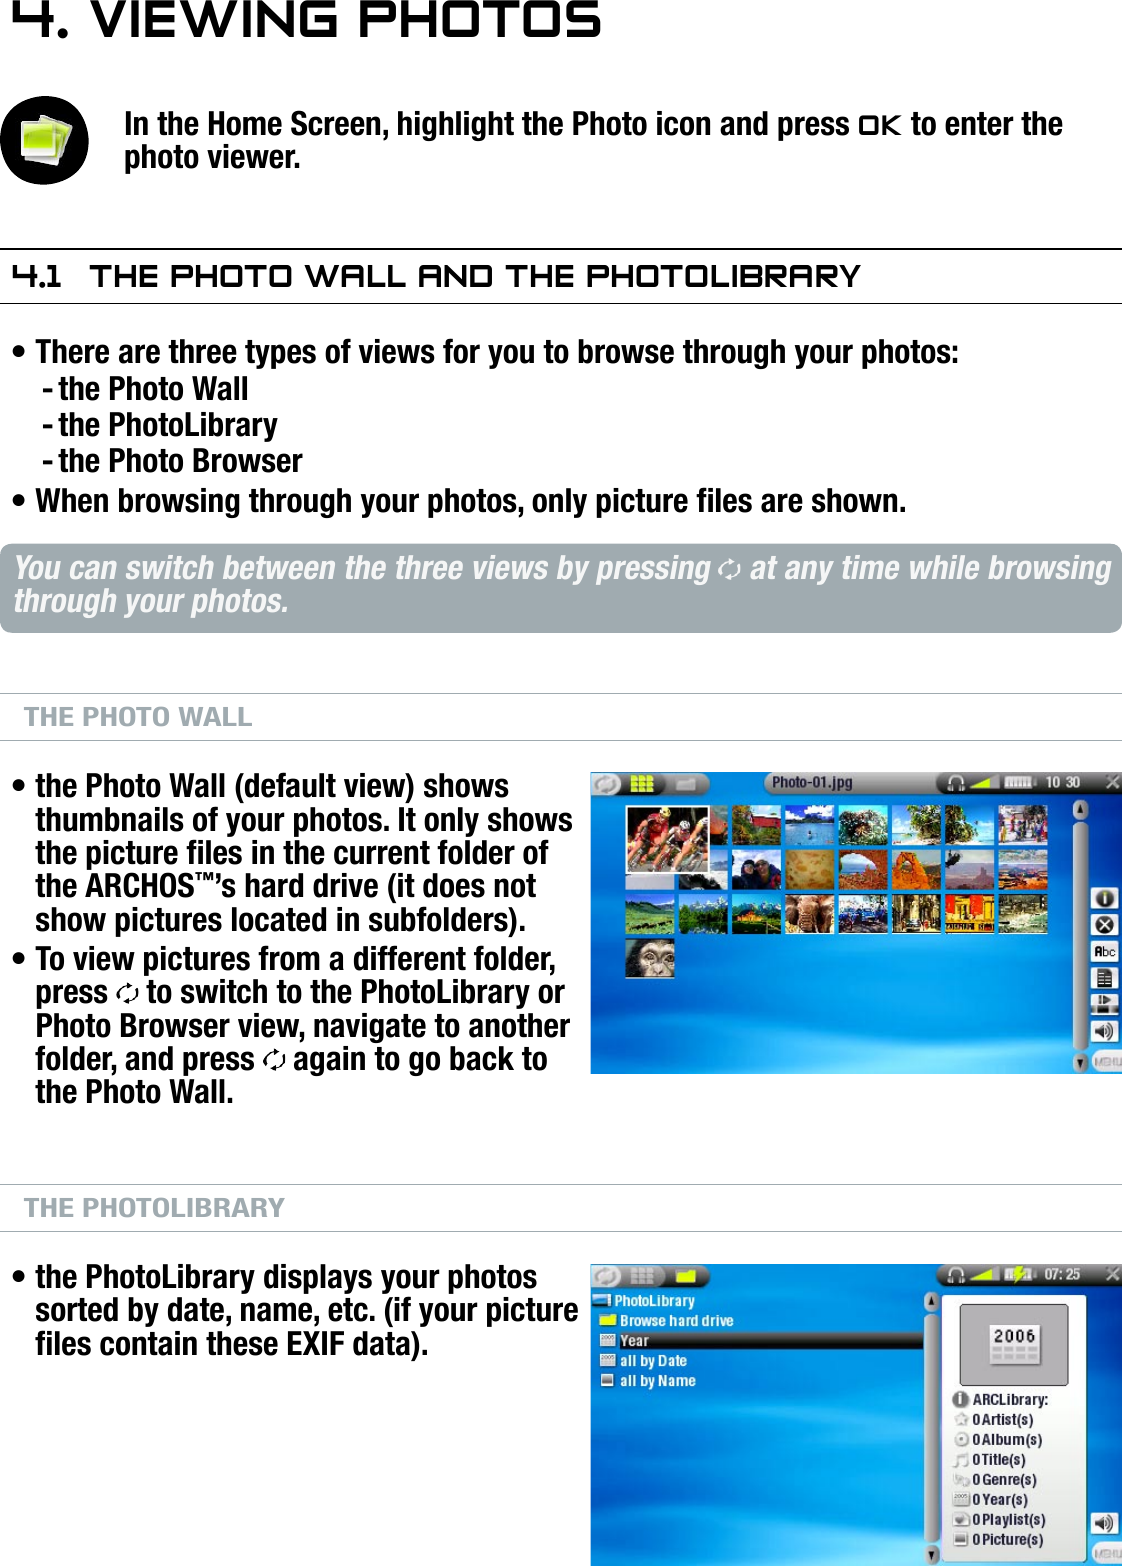 504/604MANUAL V2.0VIEWING PHOTOS   &gt;   p. 264. VIewIng PhOTOsIn the Home Screen, highlight the Photo icon and press OK to enter the photo viewer.4.1  The PhOTO wall and The PhOTOlIbraryThere are three types of views for you to browse through your photos:the Photo Wallthe PhotoLibrarythe Photo BrowserWhen browsing through your photos, only picture les are shown.You can switch between the three views by pressing   at any time while browsing through your photos.THE PHOTO WALLthe Photo Wall (default view) shows thumbnails of your photos. It only shows the picture les in the current folder of the ARCHOS™’s hard drive (it does not show pictures located in subfolders).To view pictures from a different folder, press   to switch to the PhotoLibrary or Photo Browser view, navigate to another folder, and press   again to go back to the Photo Wall.THE PHOTOLIBRARYthe PhotoLibrary displays your photos sorted by date, name, etc. (if your picture les contain these EXIF data).•---••••